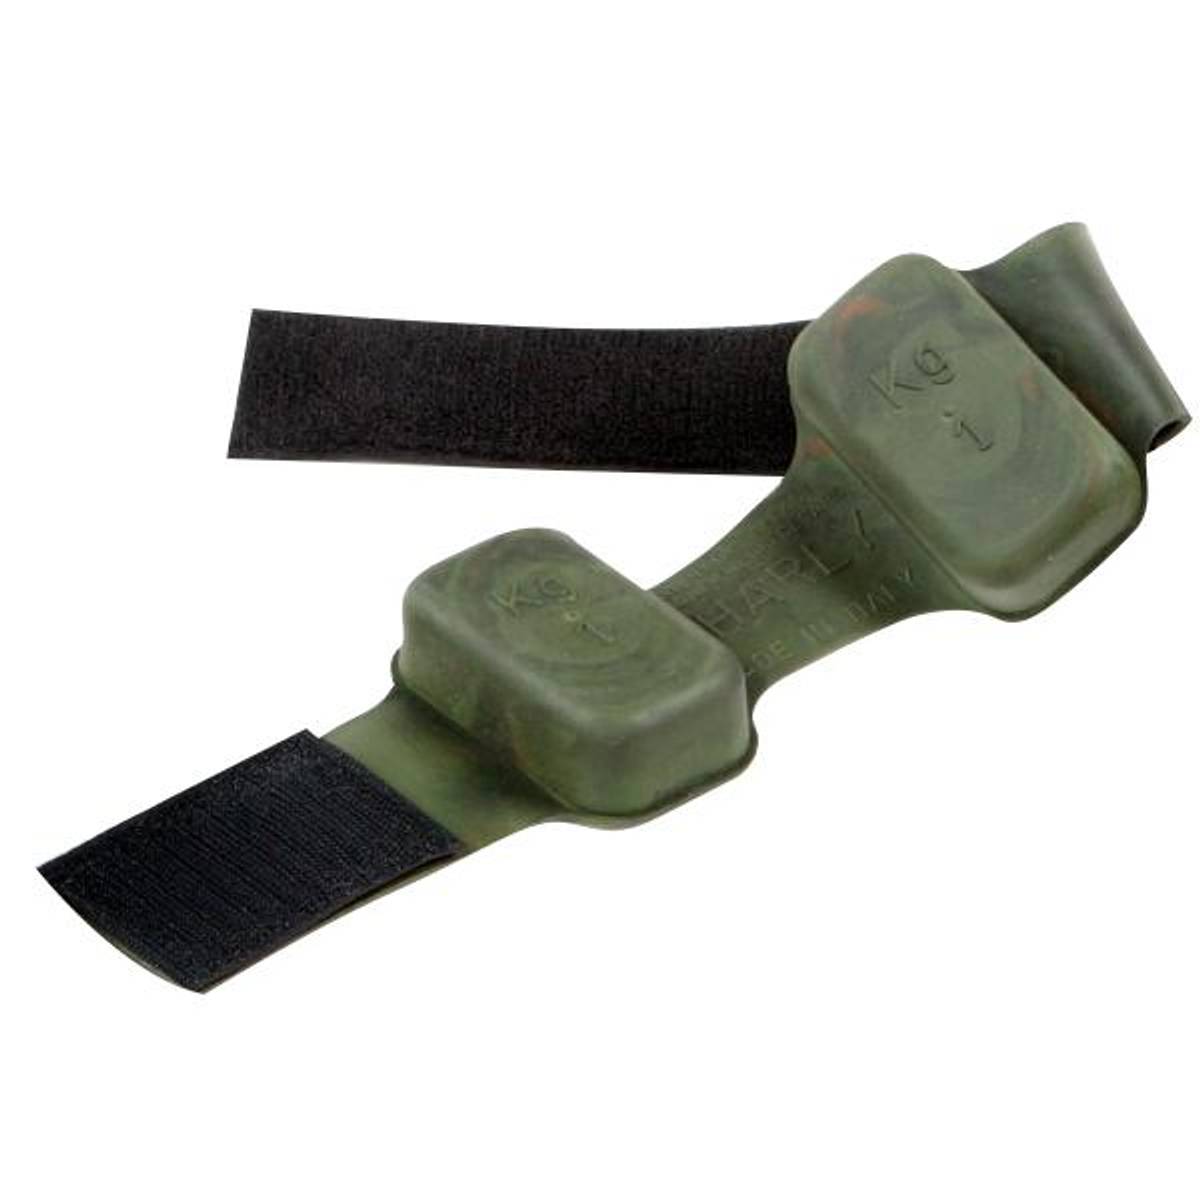 Saplast ankle weight 1 kg camouflage